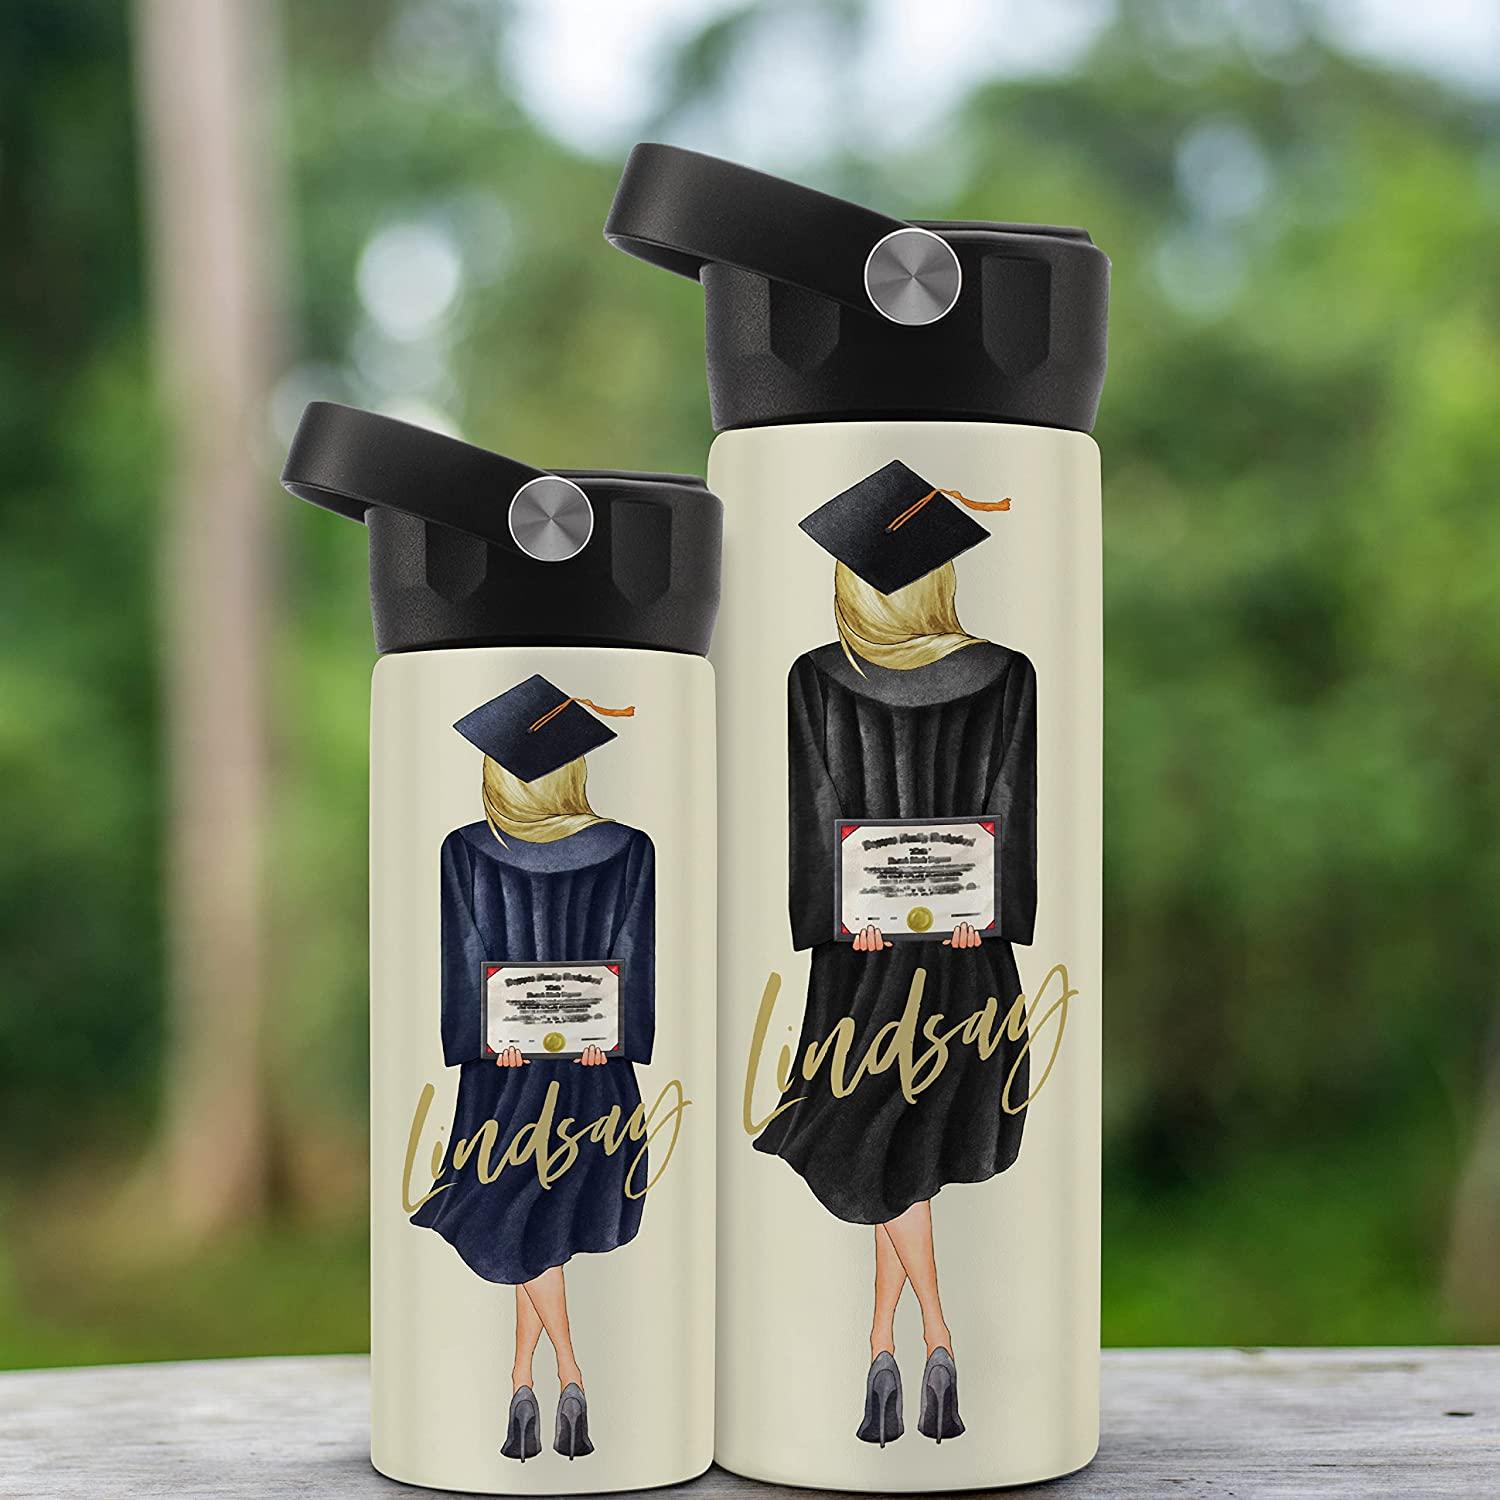 The Trendy Turtle Personalized Graduation Class of 2023 Water Bottle -  Aluminum Reusable Drink Canister Keepsake with Custom Name